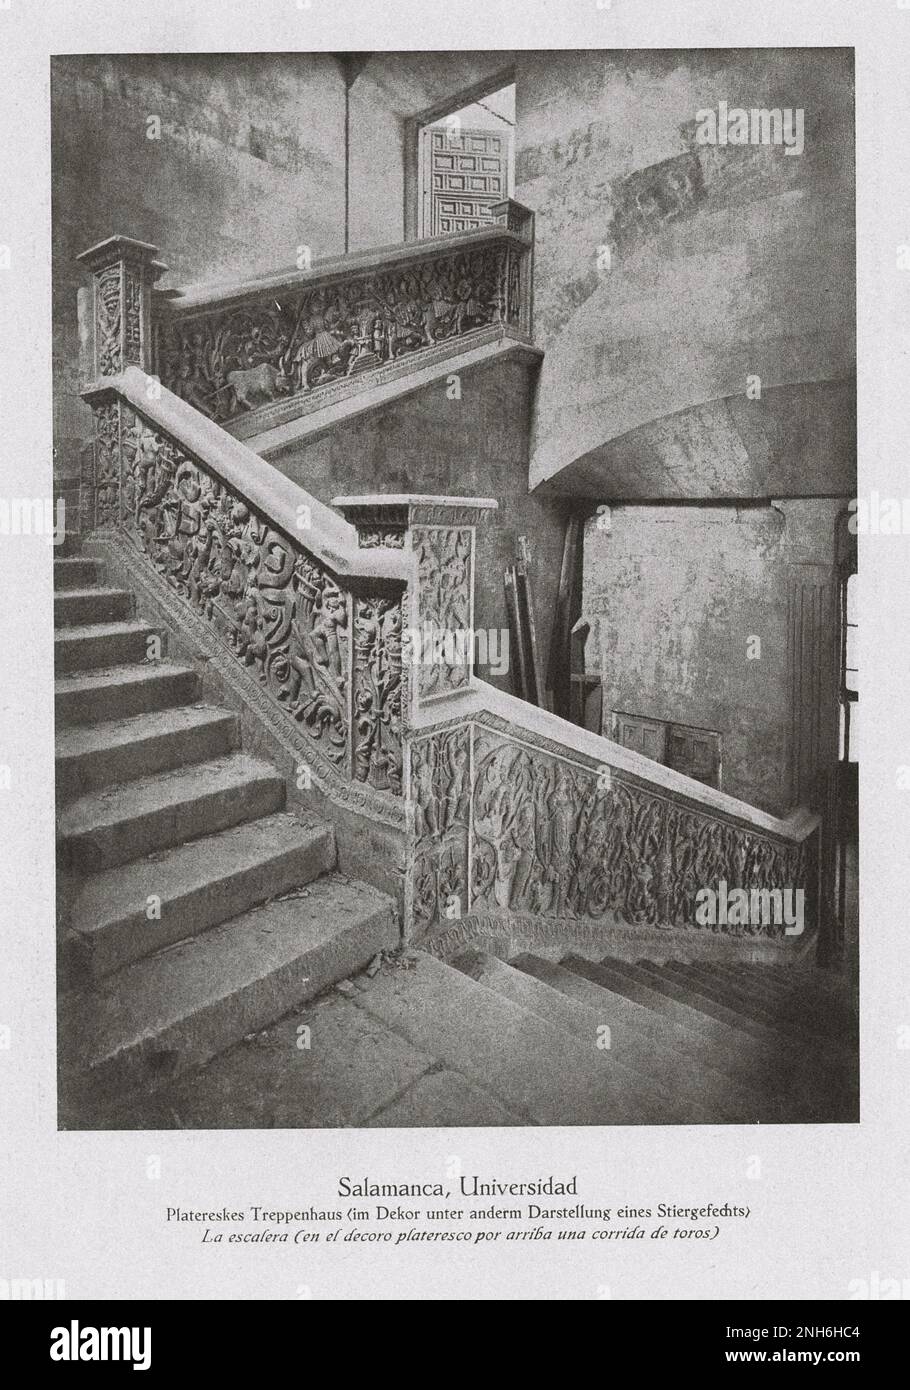 Architecture of Old Spain. Vintage photo of University of Salamanca (Universidad de Salamanca). Plateresque staircase (in the decor, among other things, depicting a bullfight). Stock Photo